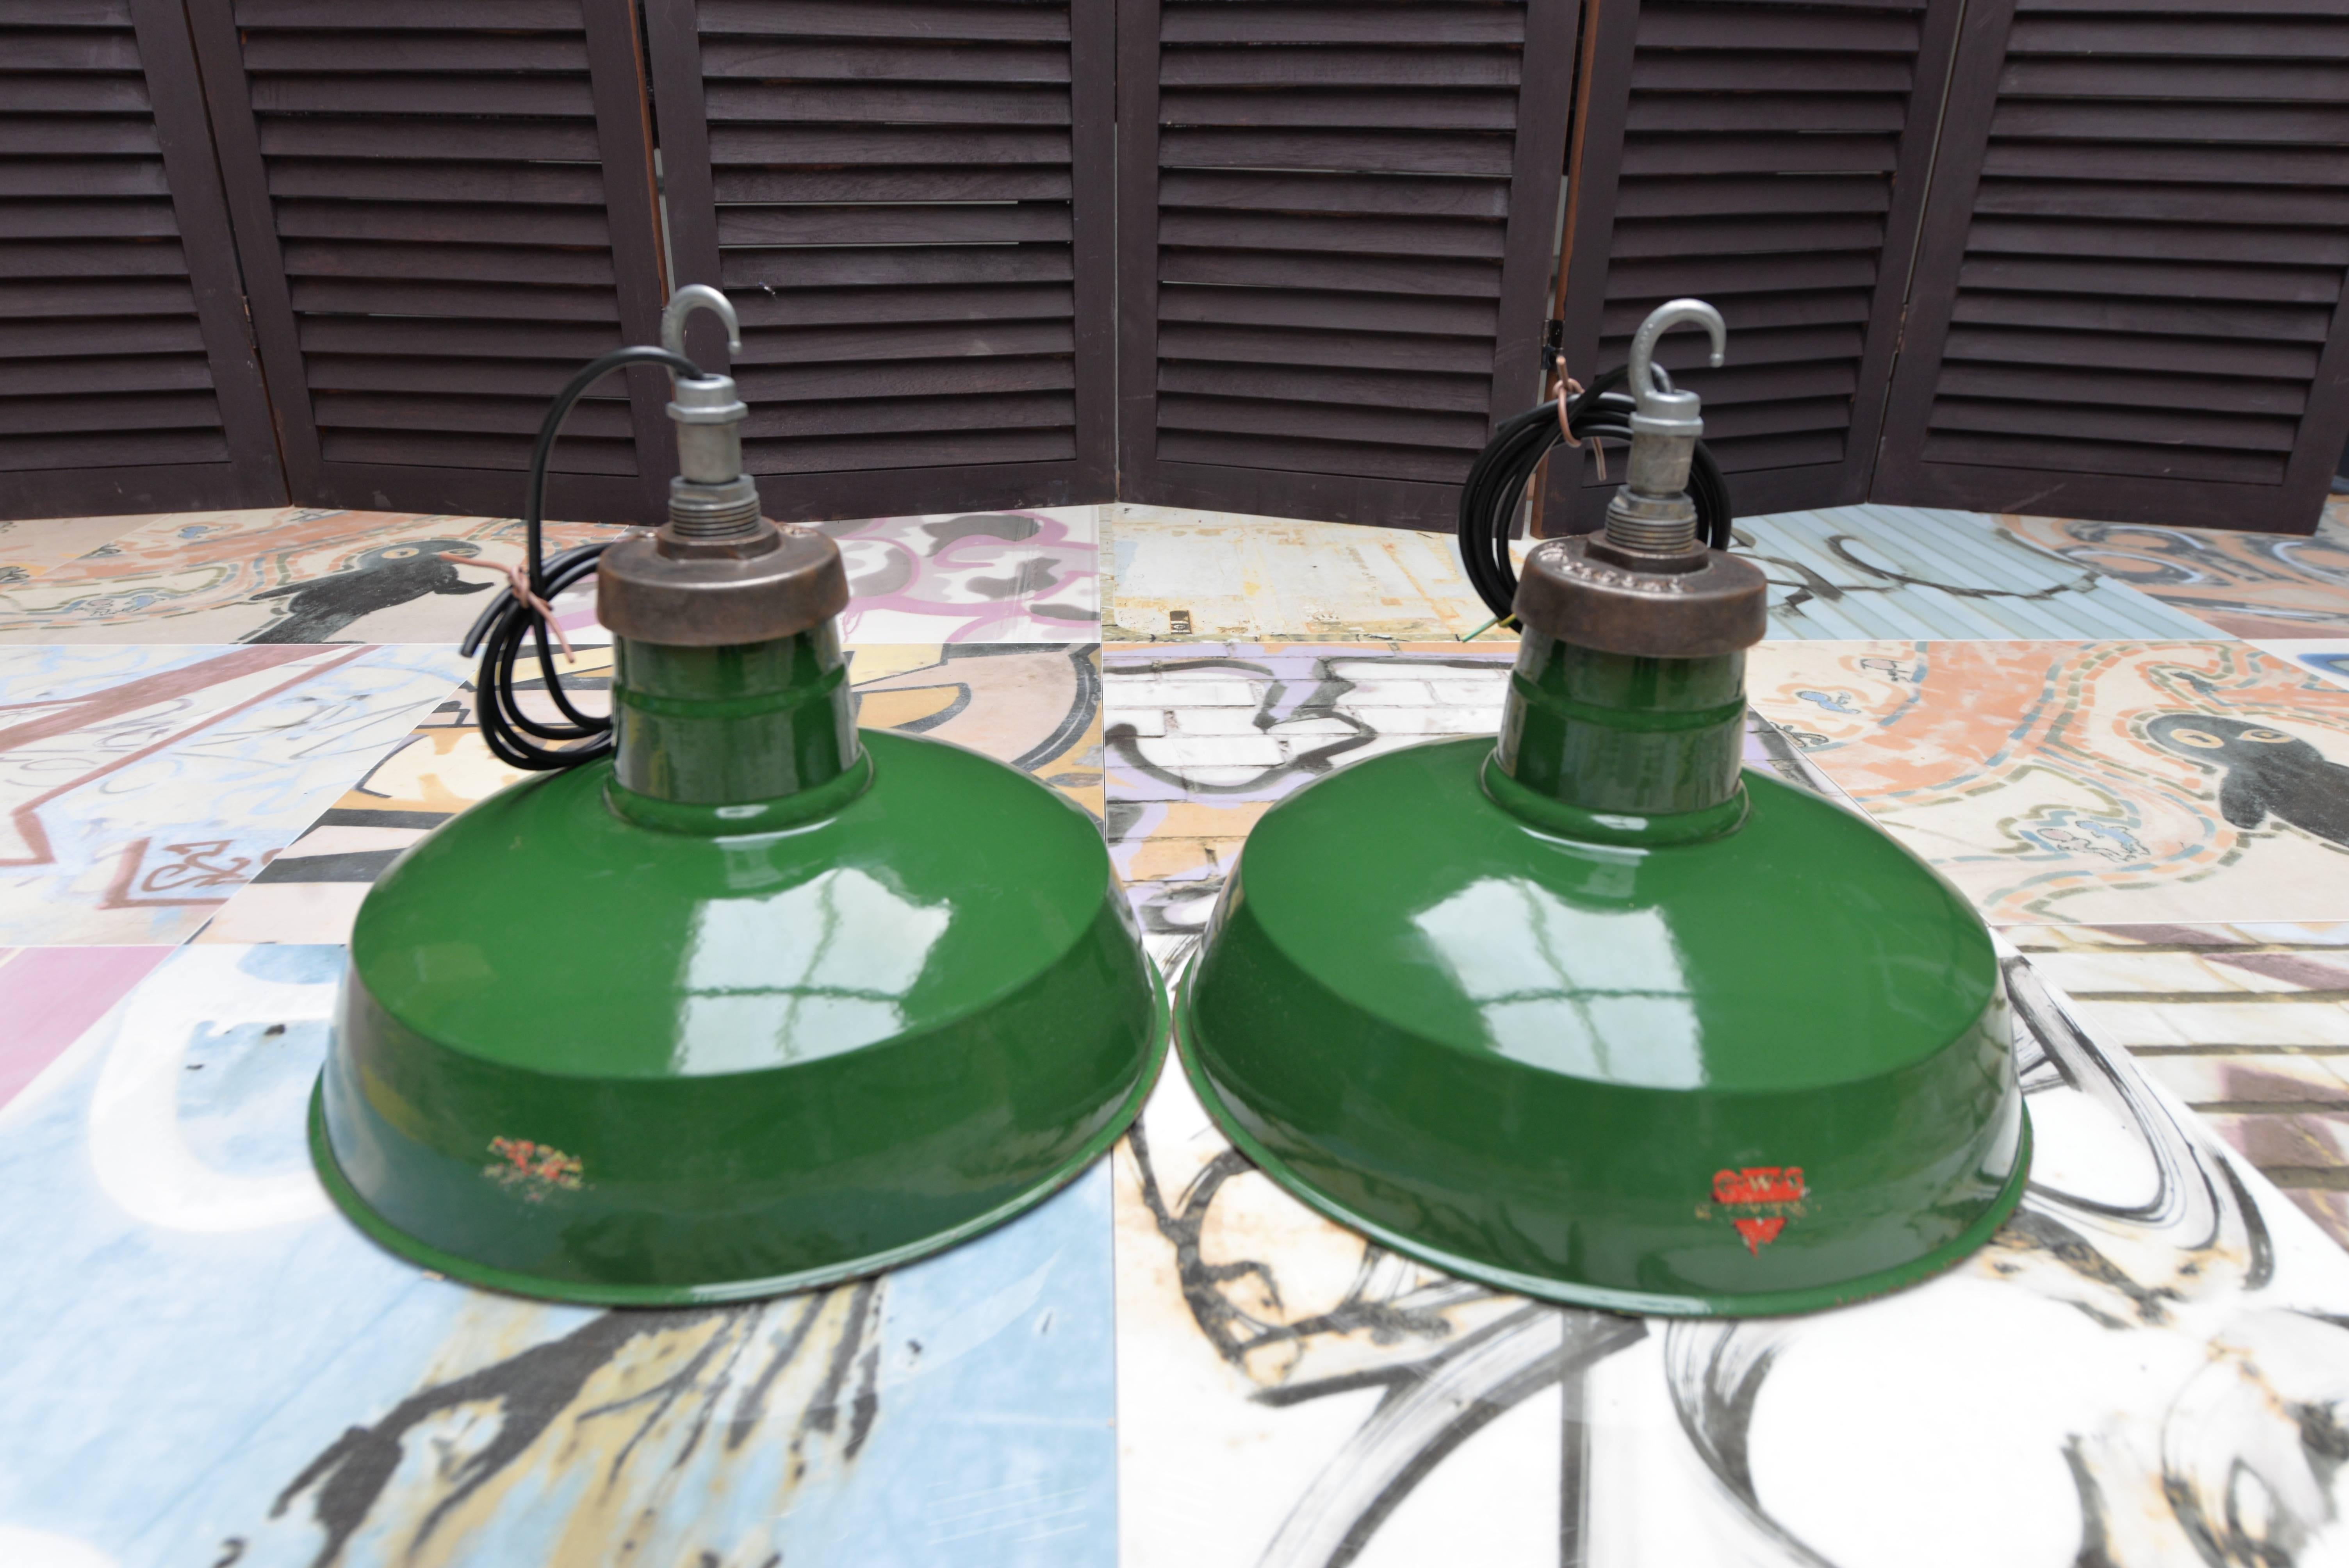 If shipped to the US or EU, no import tax applies. 

These green pendants have been cleaned, polished and rewired. 

The bulb fittings are original ceramic and the pendants are supplied with suspension chains.